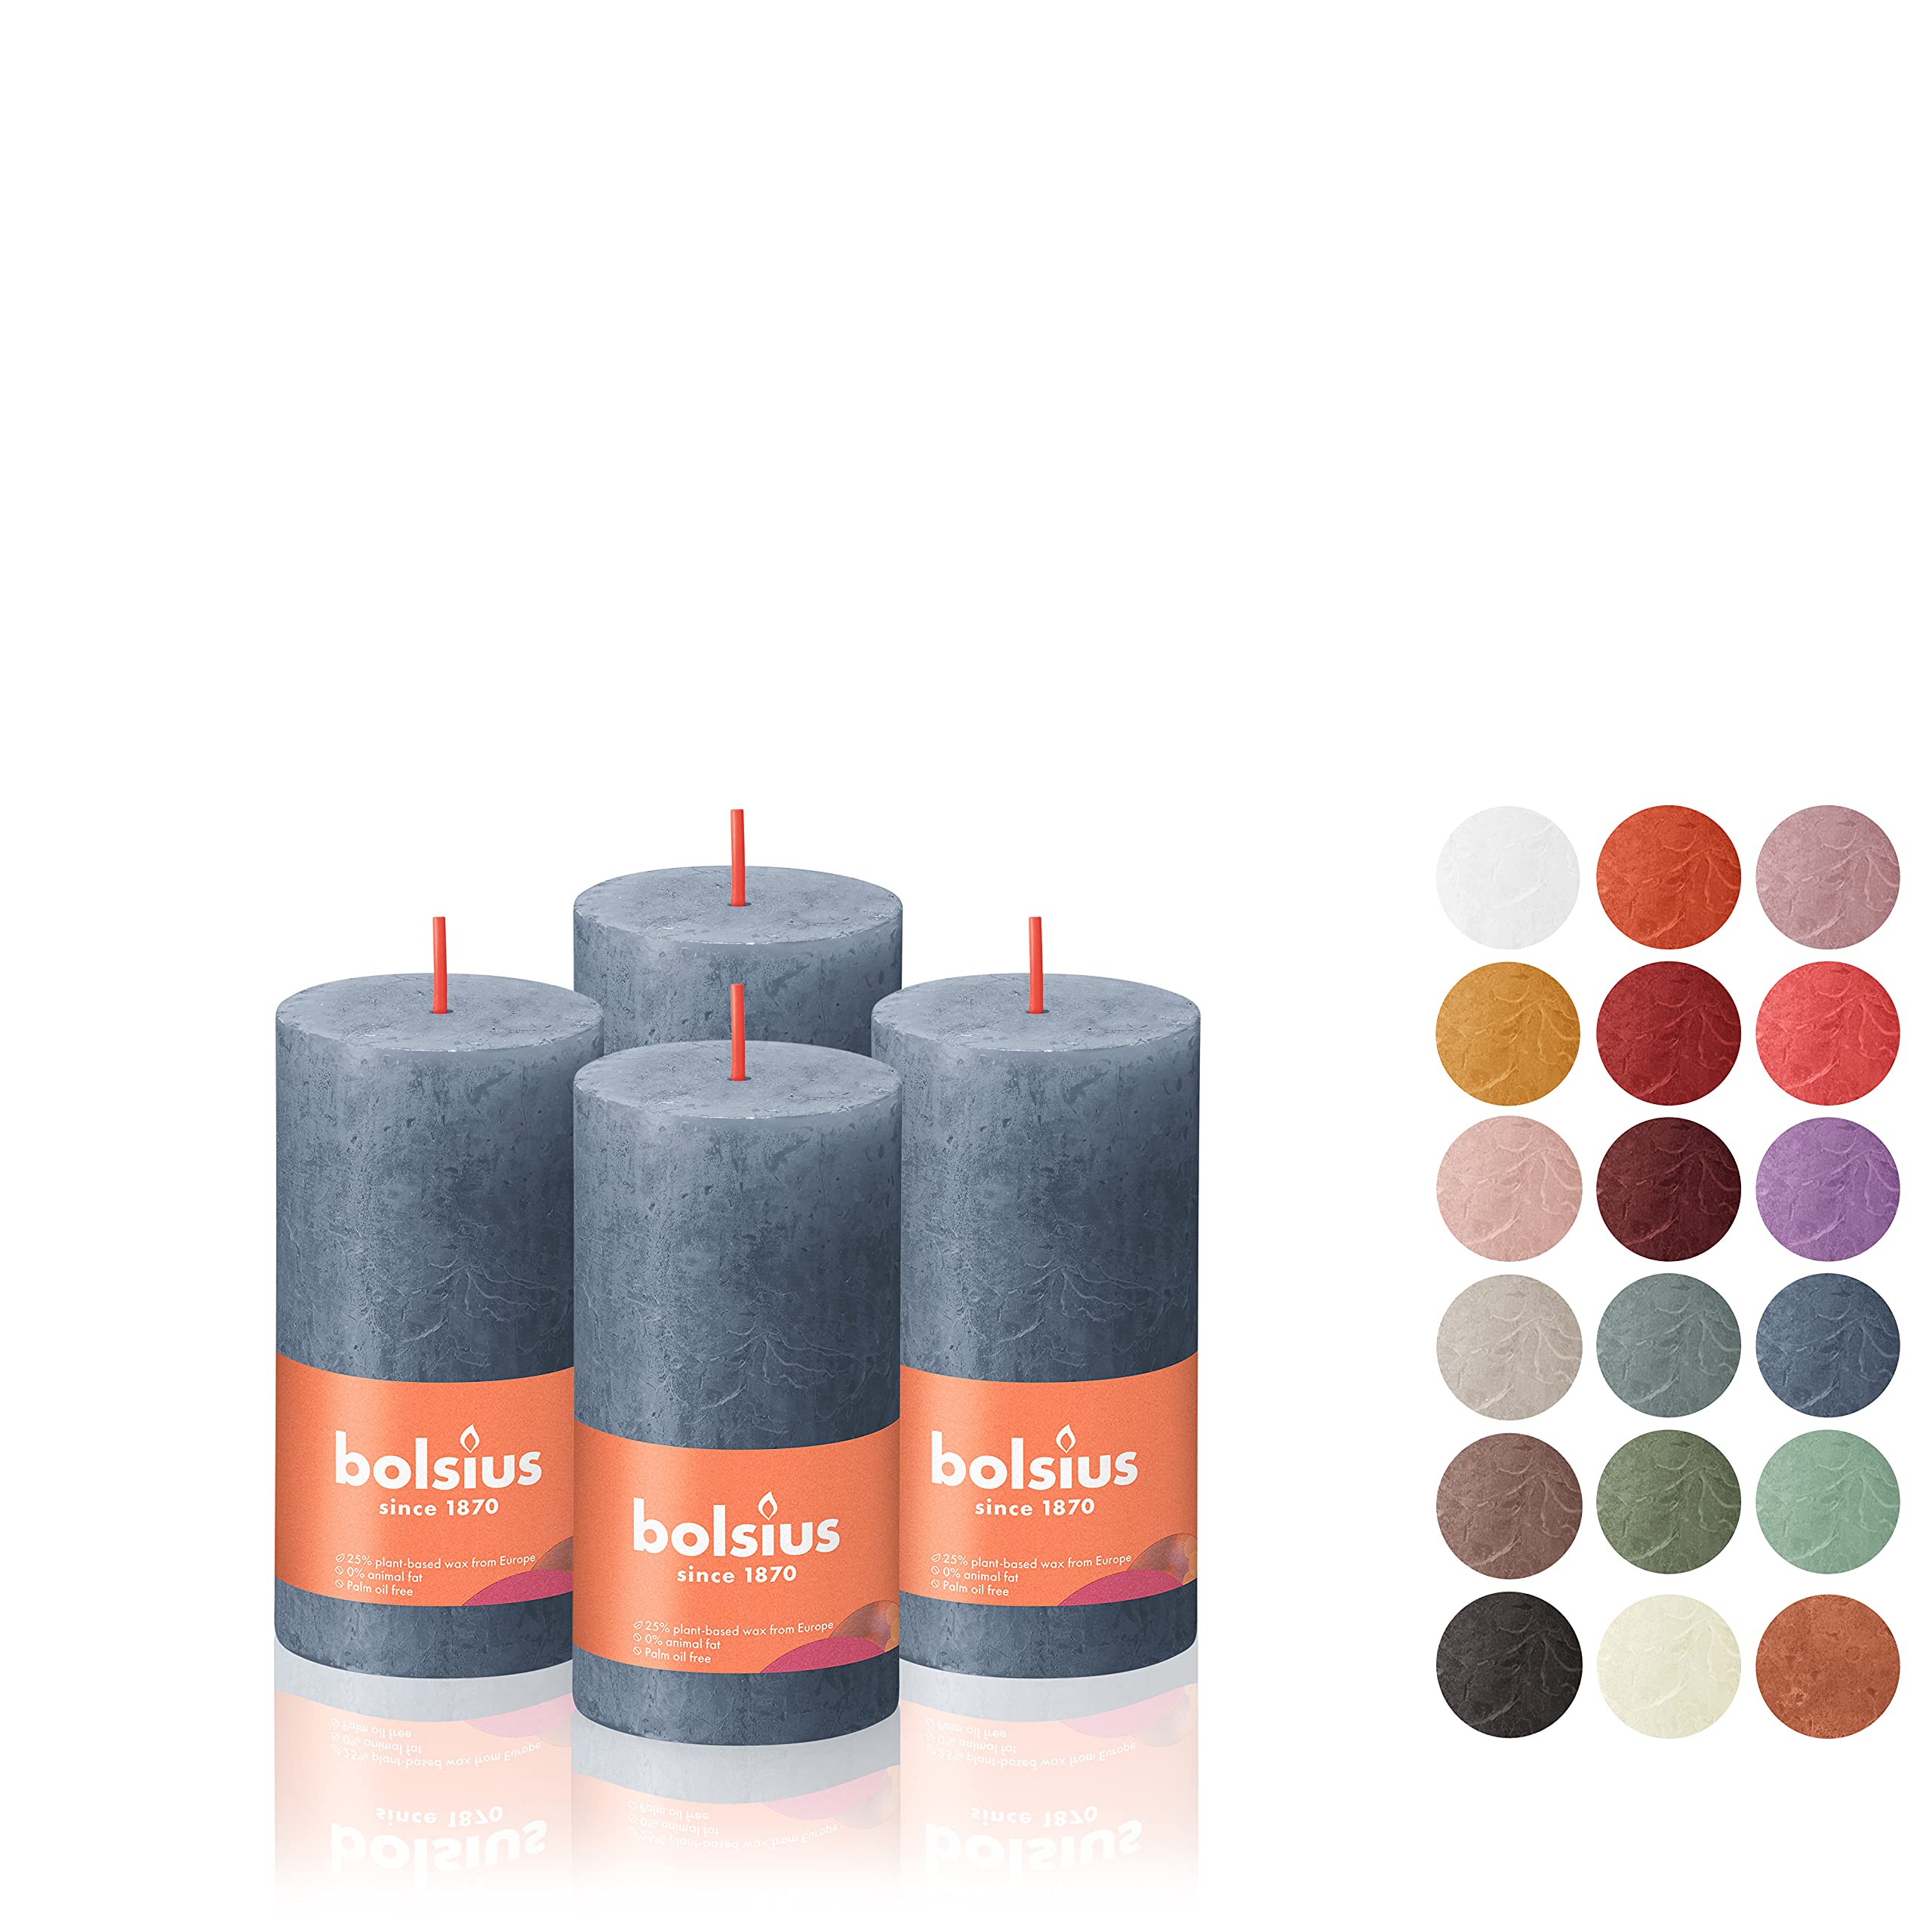 BOLSIUS 4 Pack Twilight Blue Rustic Pillar Candles - 2 X 4 Inches - Premium European Quality - Includes Natural Plant-Based Wax - Unscented Dripless Smokeless 30 Hour Party and Wedding Candles  - Very Good